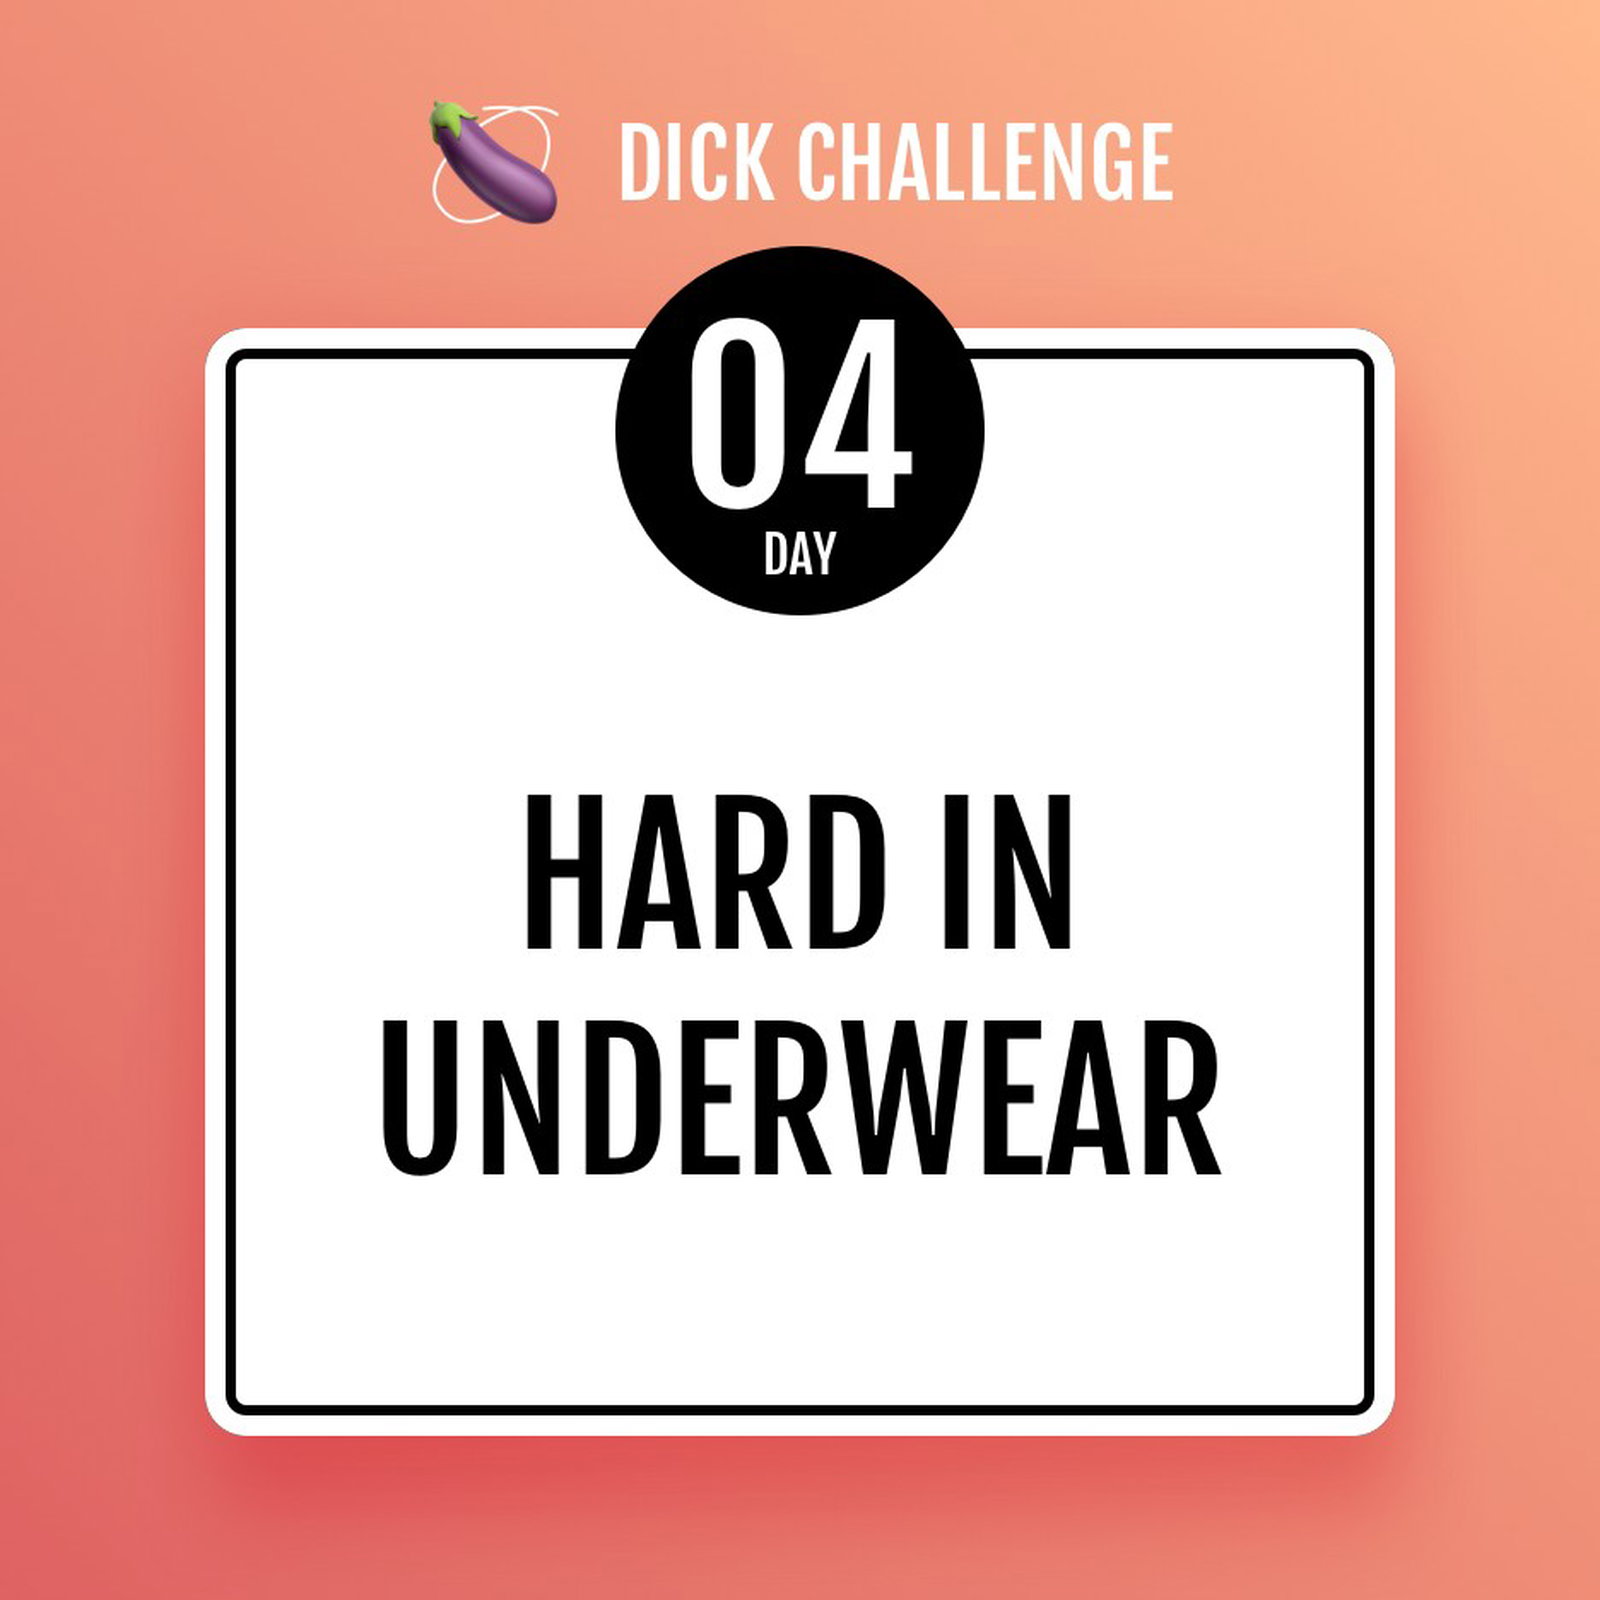 Photo by Fan in Heat with the username @faninheat, who is a verified user,  January 15, 2019 at 11:13 AM. The post is about the topic Dick Challenge and the text says 'Call to Challenge

Show off how pervy you can be. Perform the 31 challenges to become a Dick Challenge Winner!
There is a nasty briefing for each day of the month and each one is more thrilling than the other. Post sexy images of your hard dick, alone..'